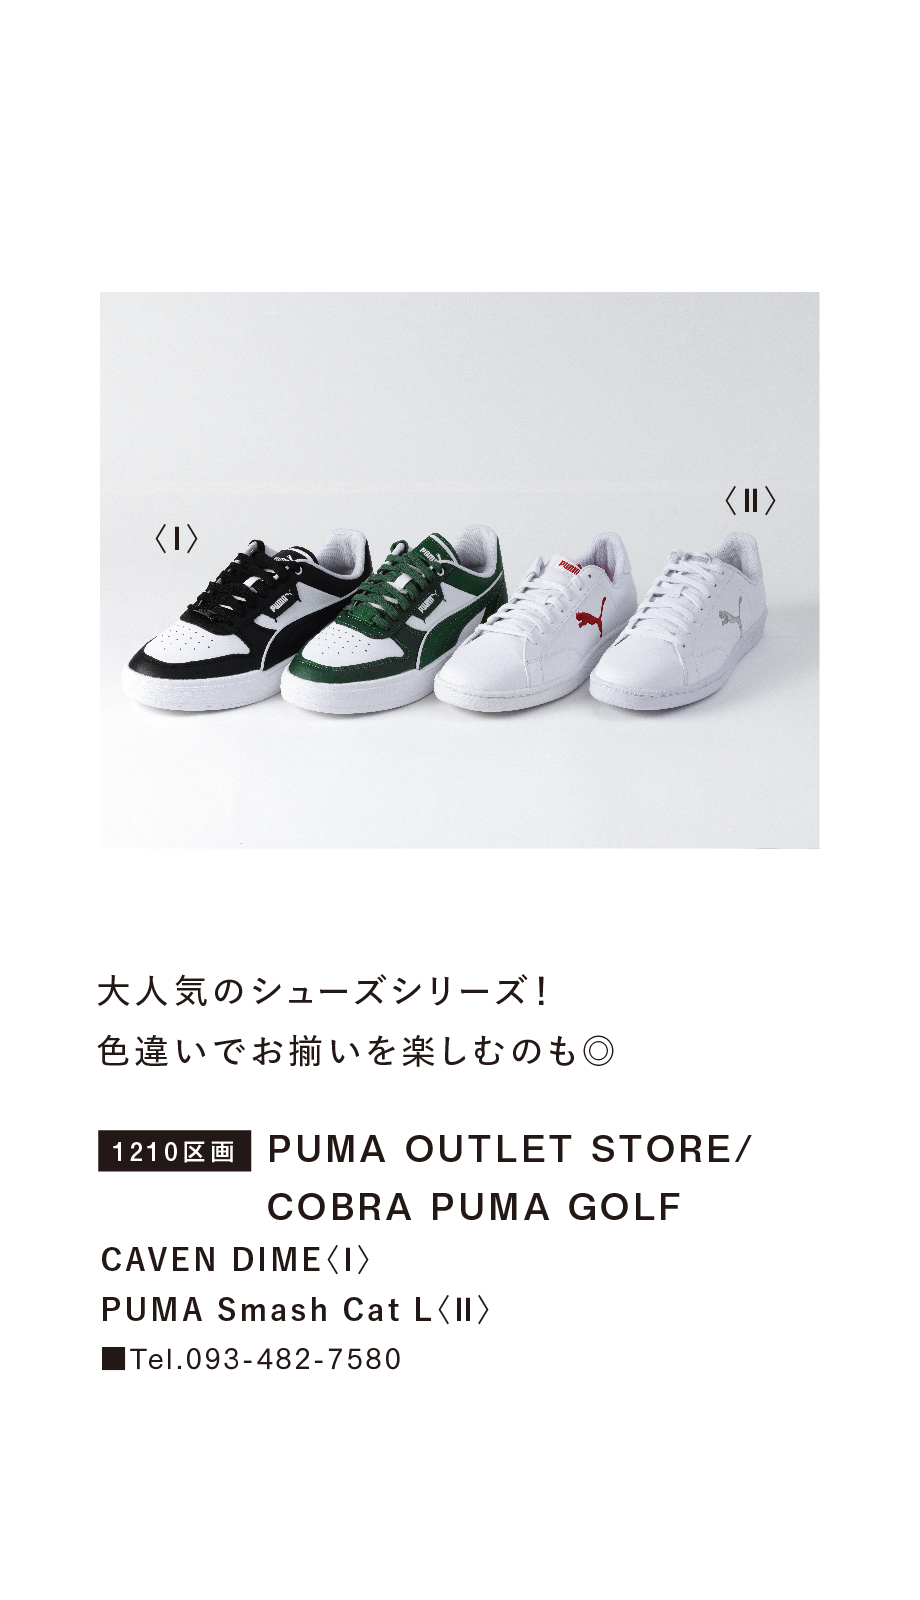 PUMA OUTLET STORE